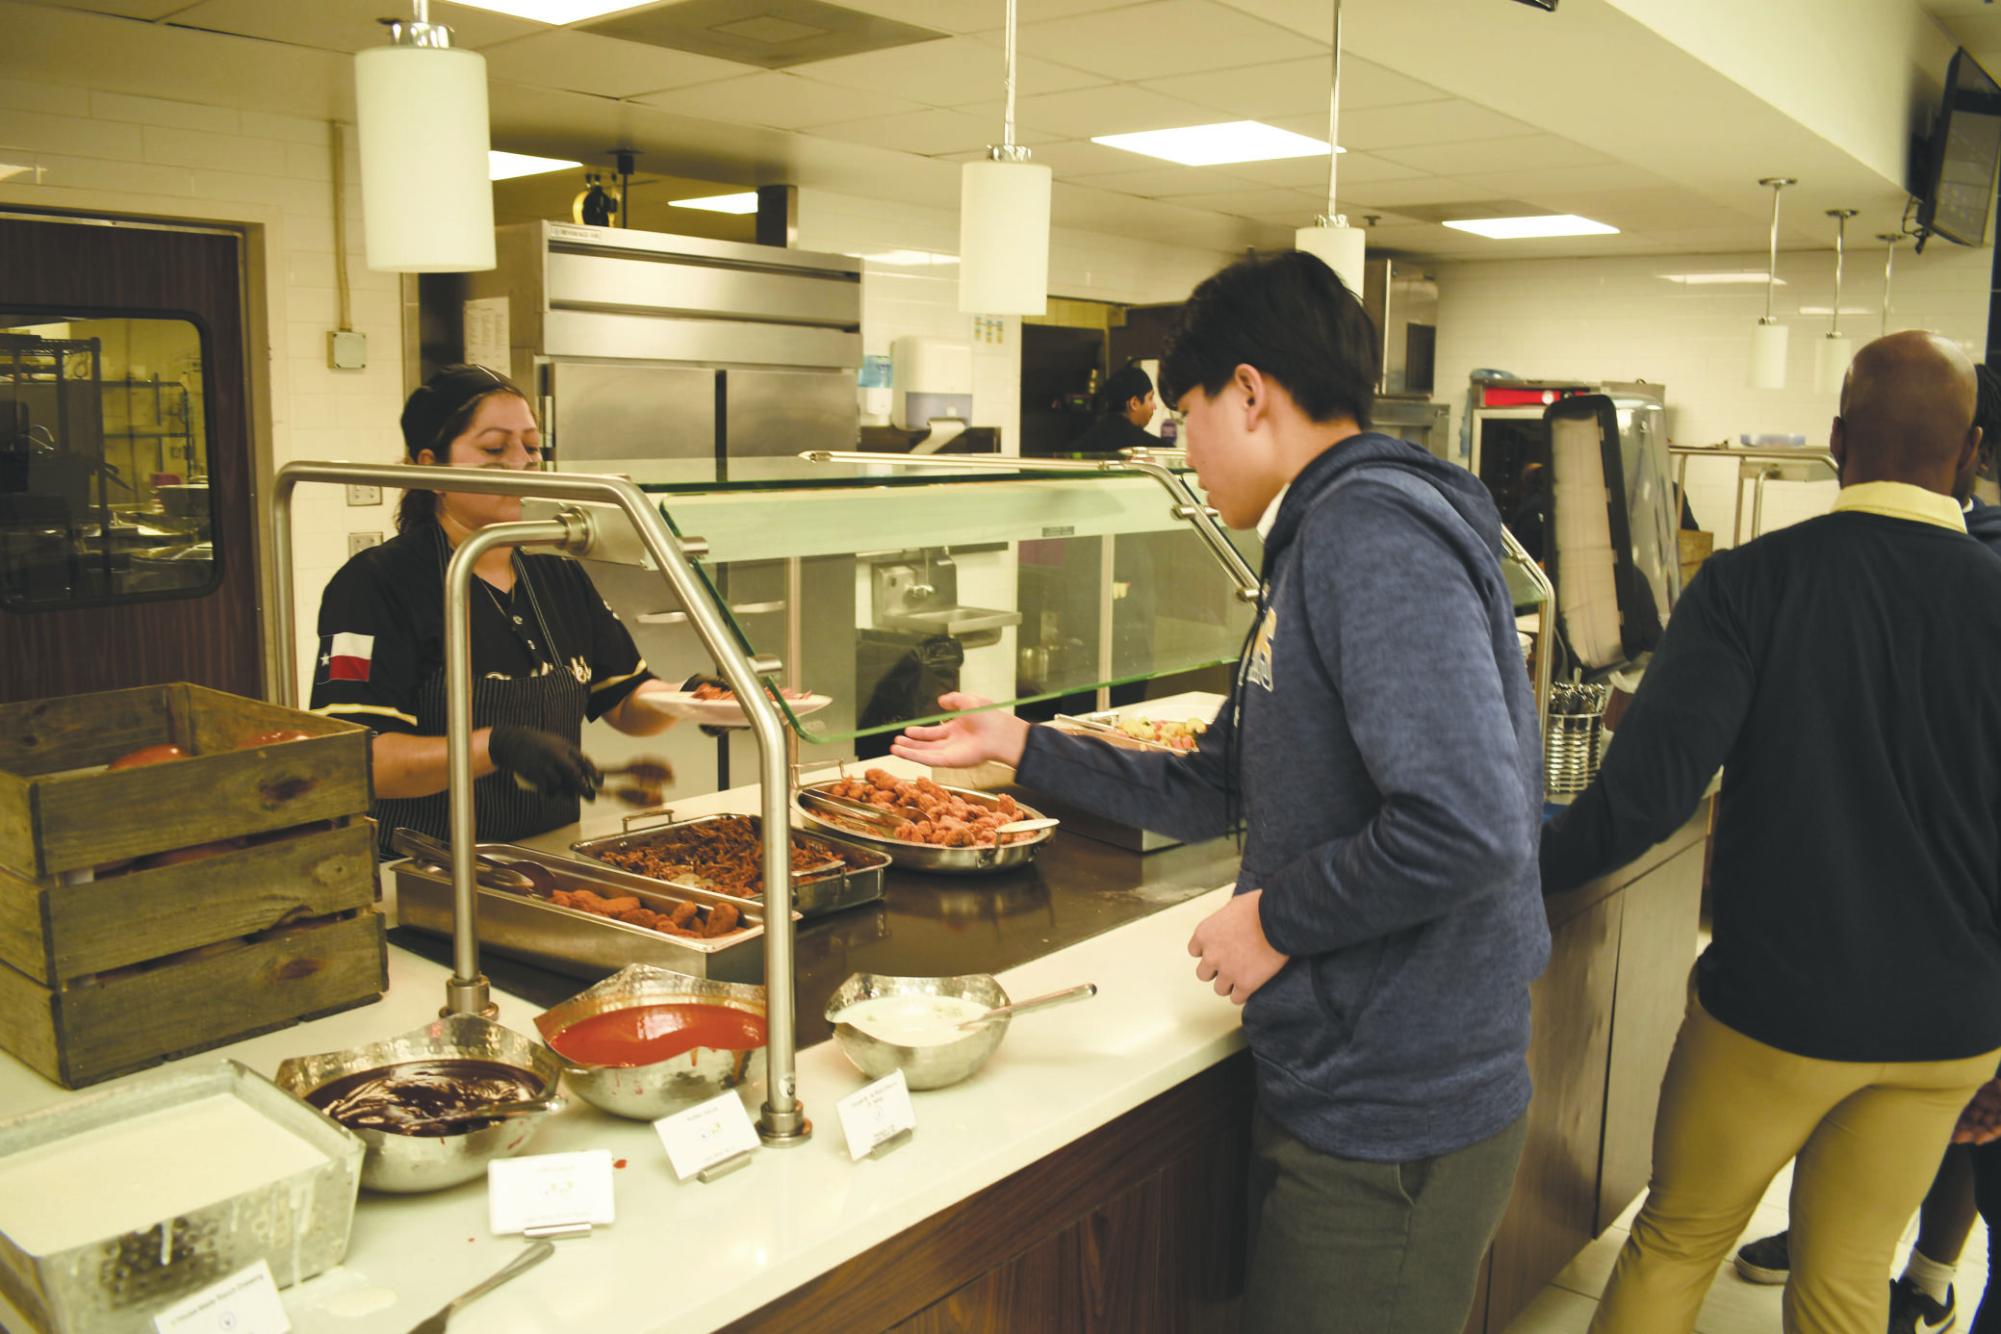 Sophomore Richard Wang reaches for his plate after choosing a variety of foods.